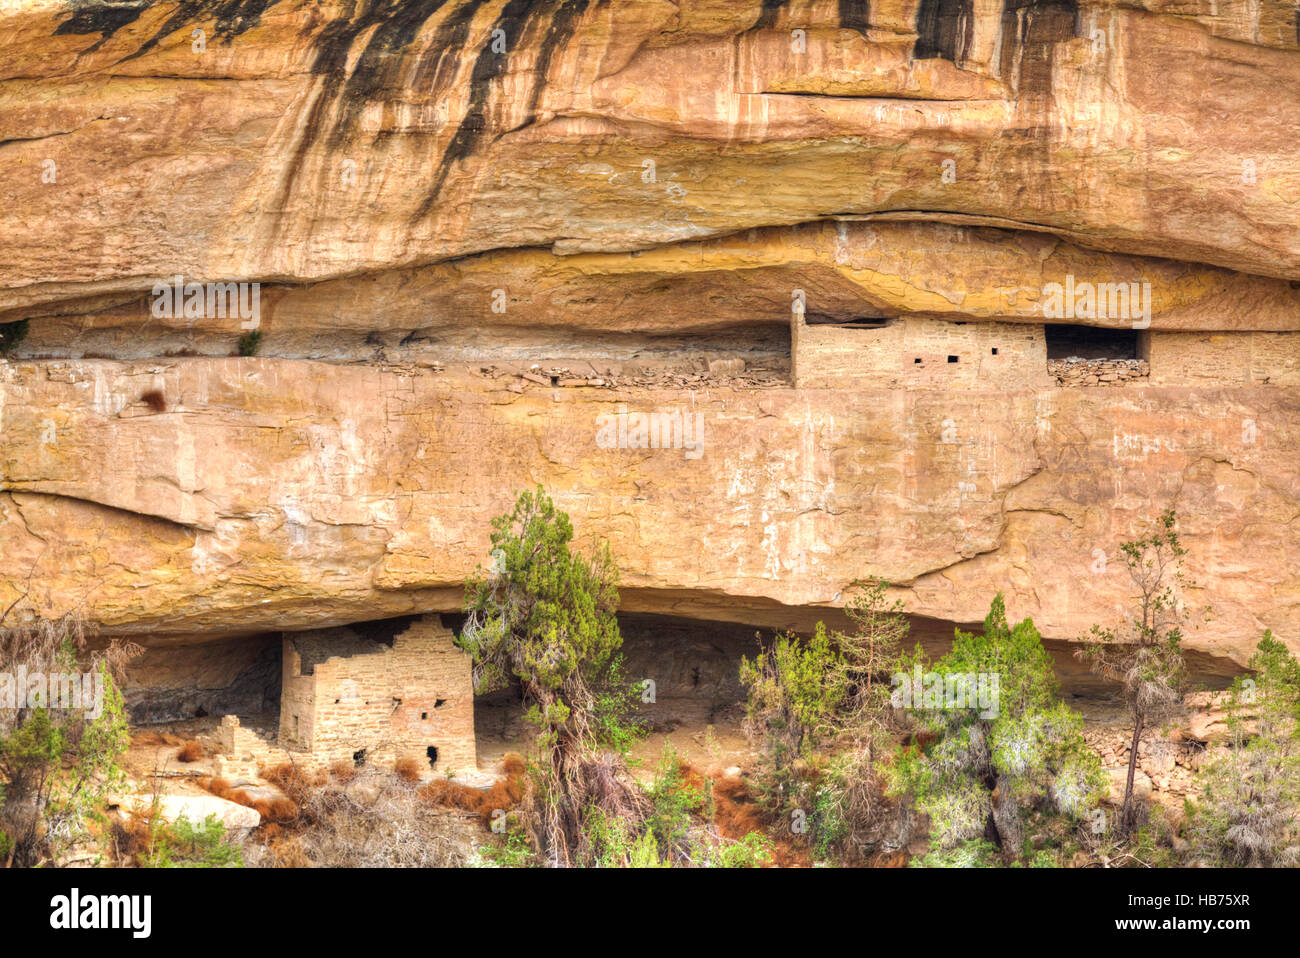 Anasazi Ruins from Sun Point View, Mesa Verde National Park, UNESCO World Heritage Site, 600 A.D. - 1,300 A.D., Colorado, USA Stock Photo